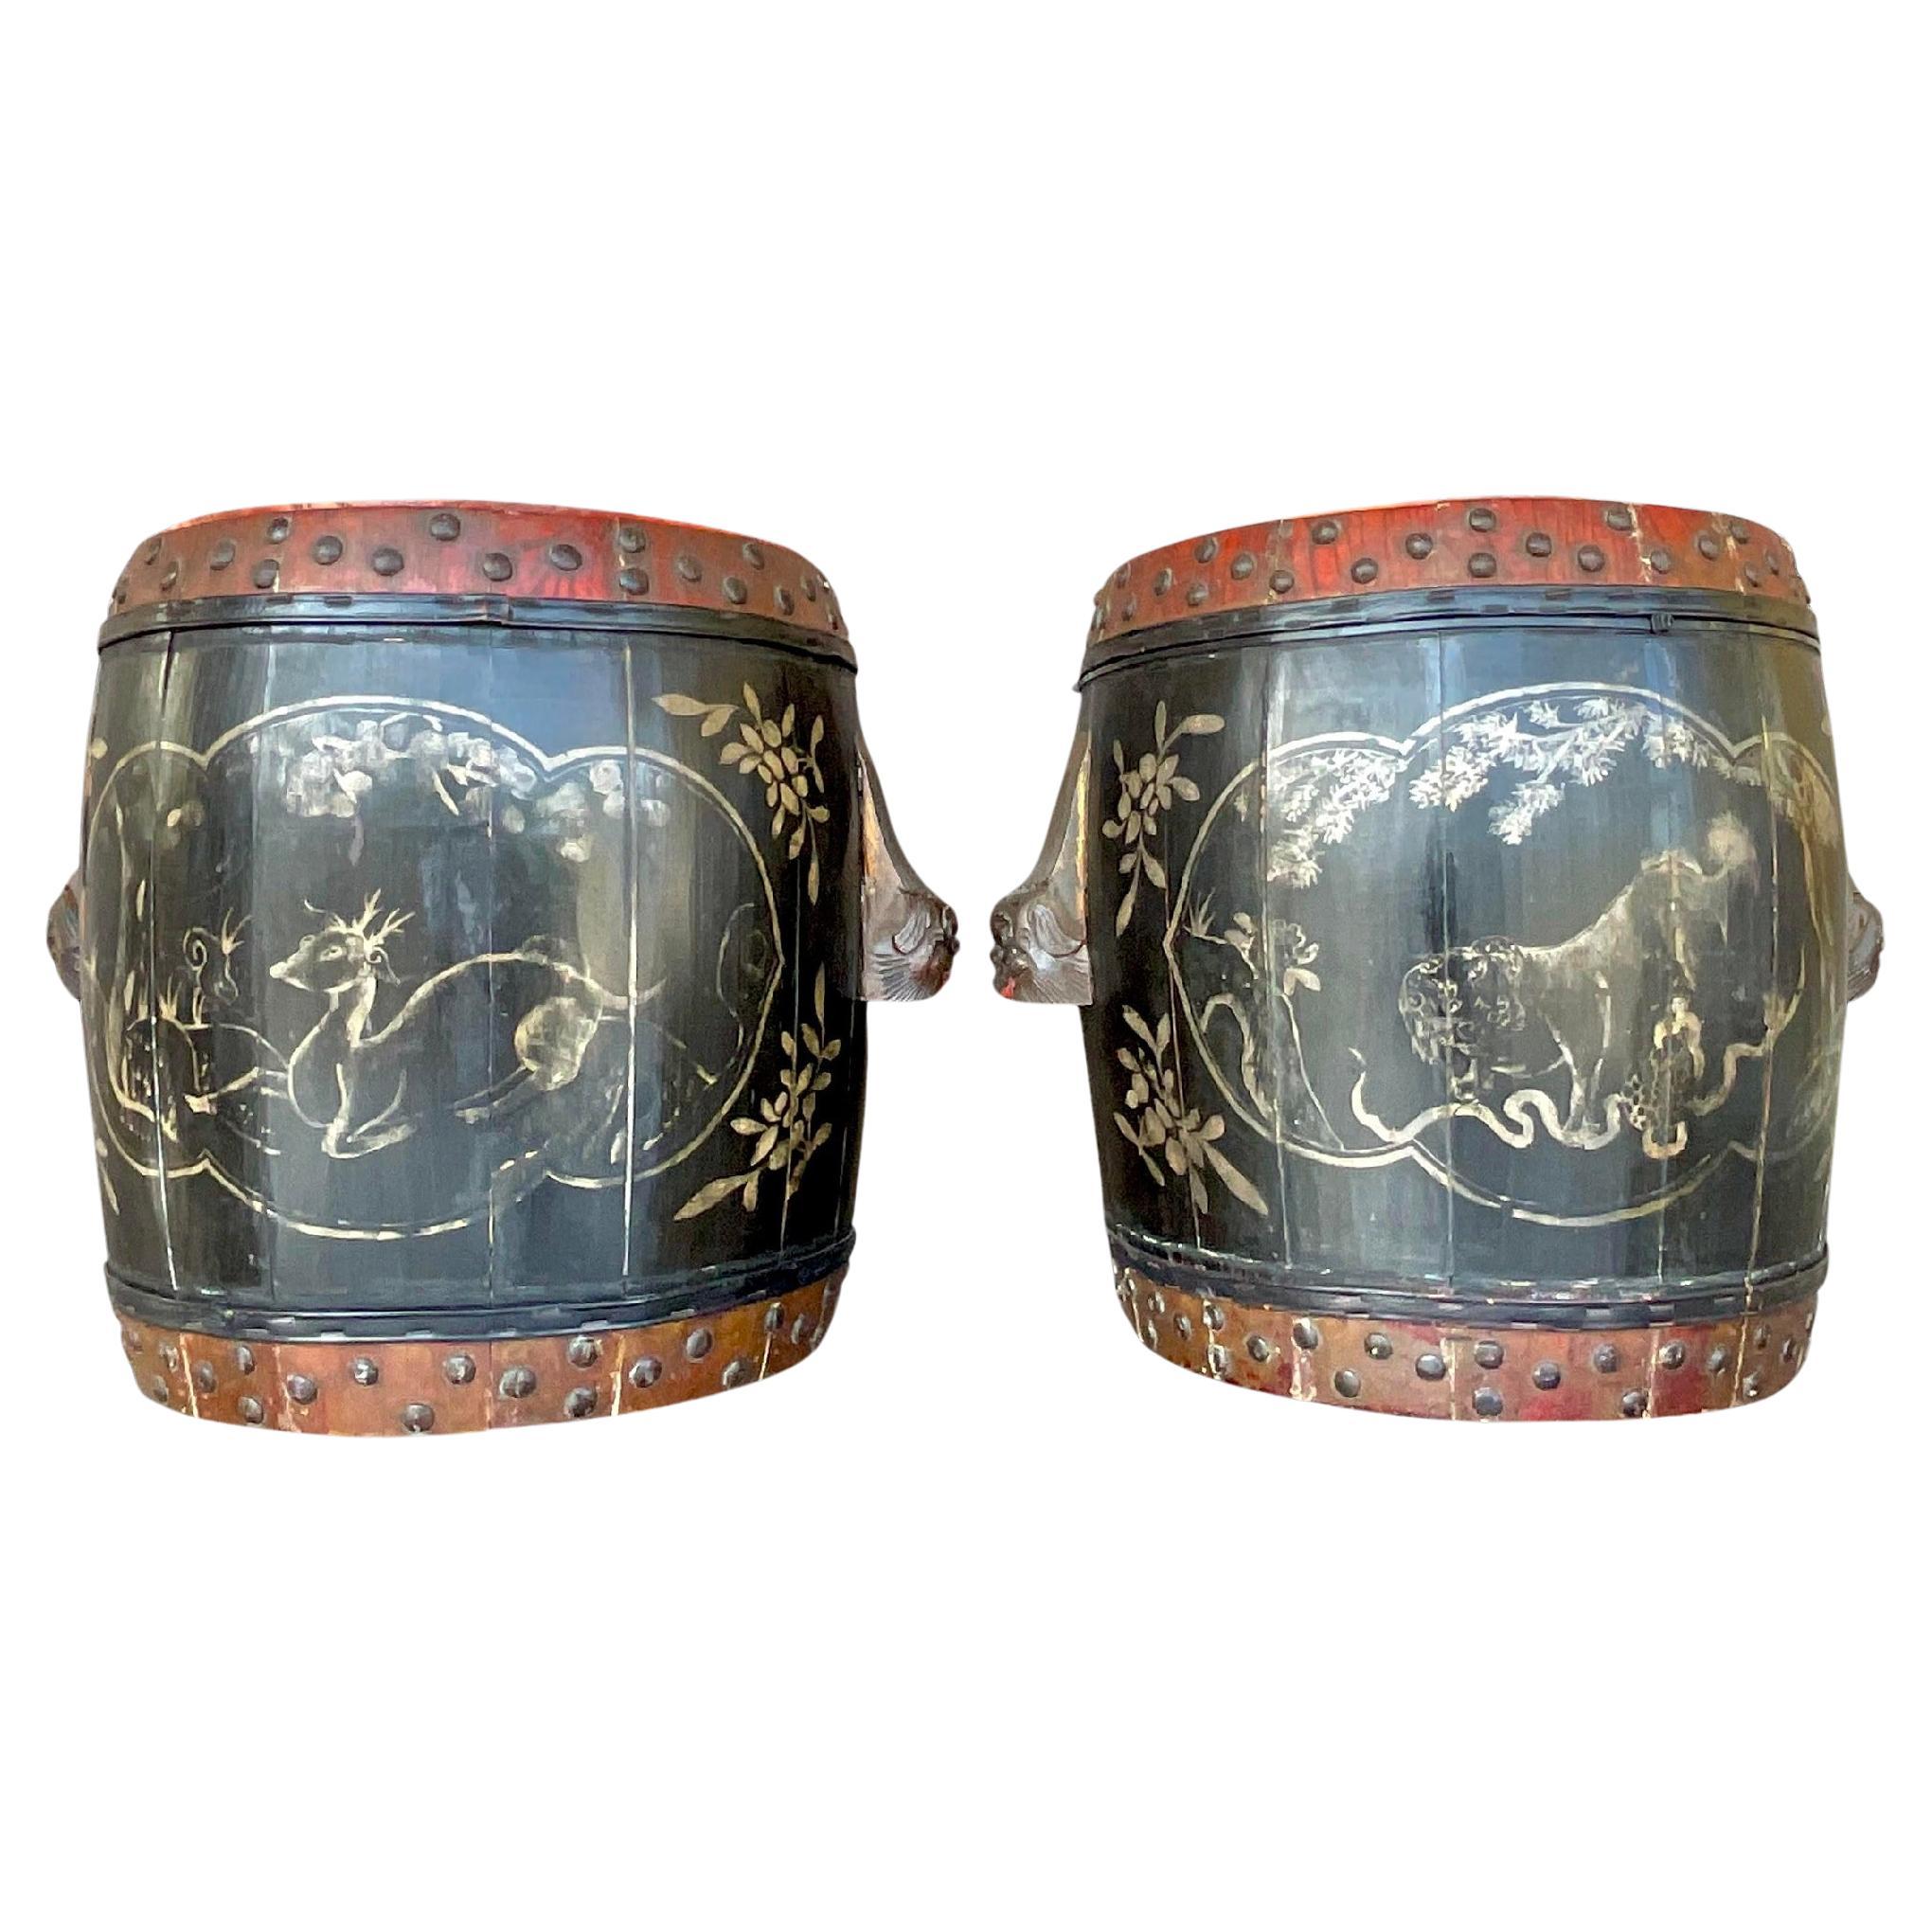 Vintage Boho Hand Painted Lidded Drums - a Pair For Sale